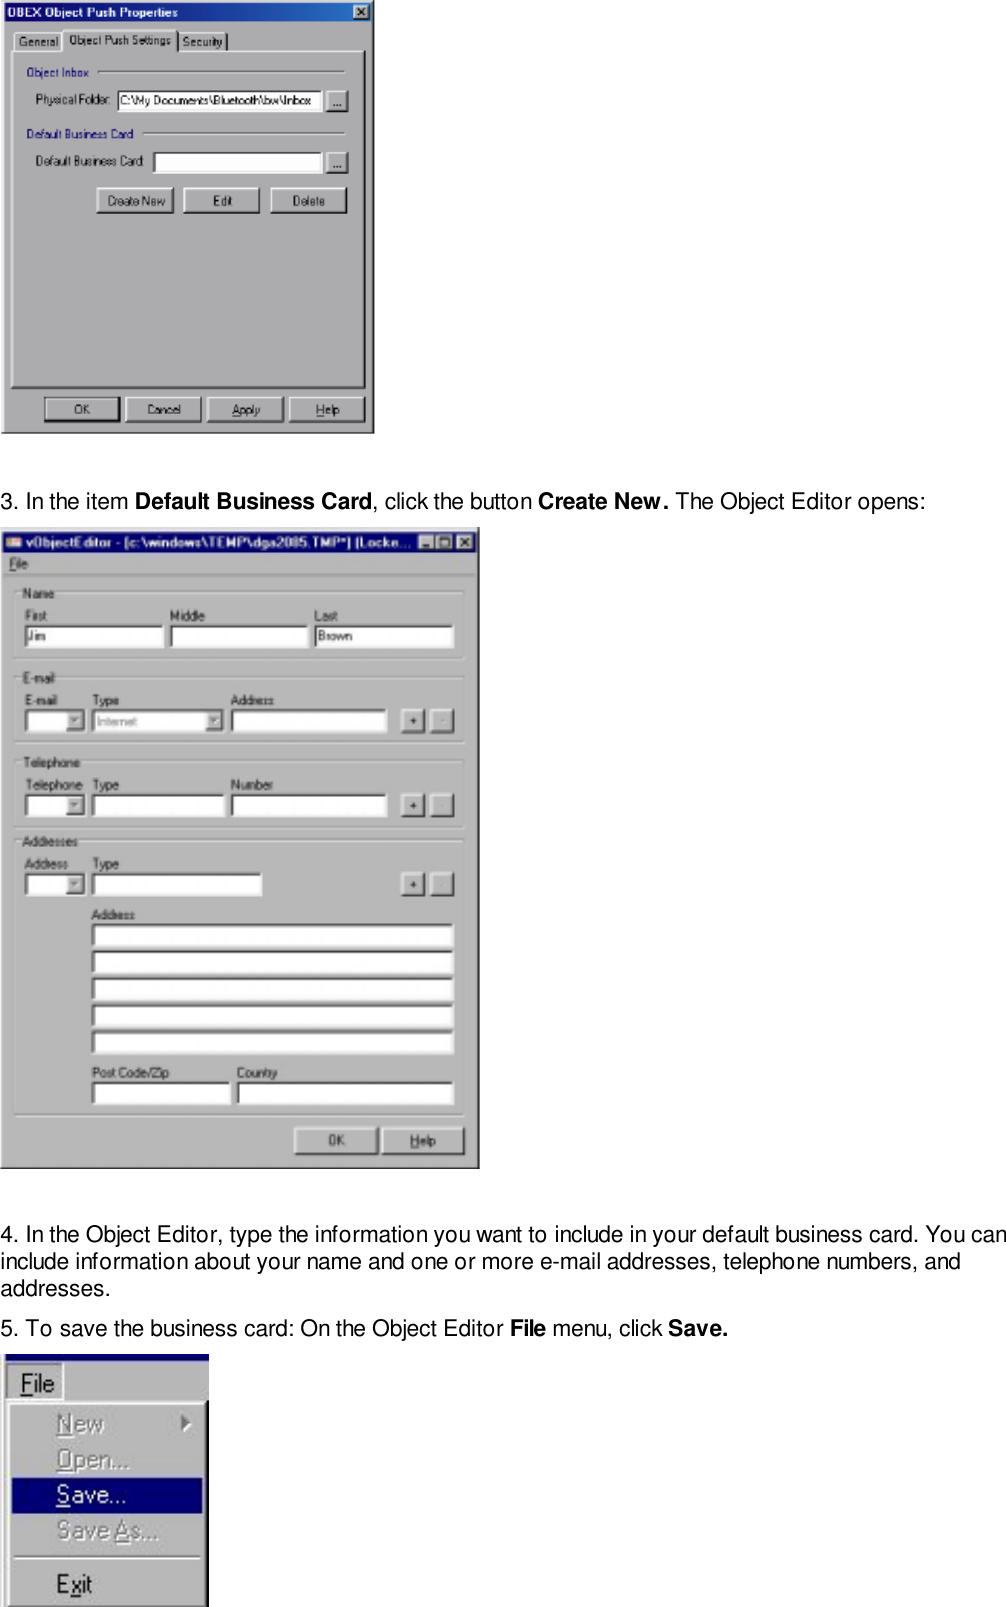 3. In the item Default Business Card, click the button Create New. The Object Editor opens:4. In the Object Editor, type the information you want to include in your default business card. You caninclude information about your name and one or more e-mail addresses, telephone numbers, andaddresses.5. To save the business card: On the Object Editor File menu, click Save.